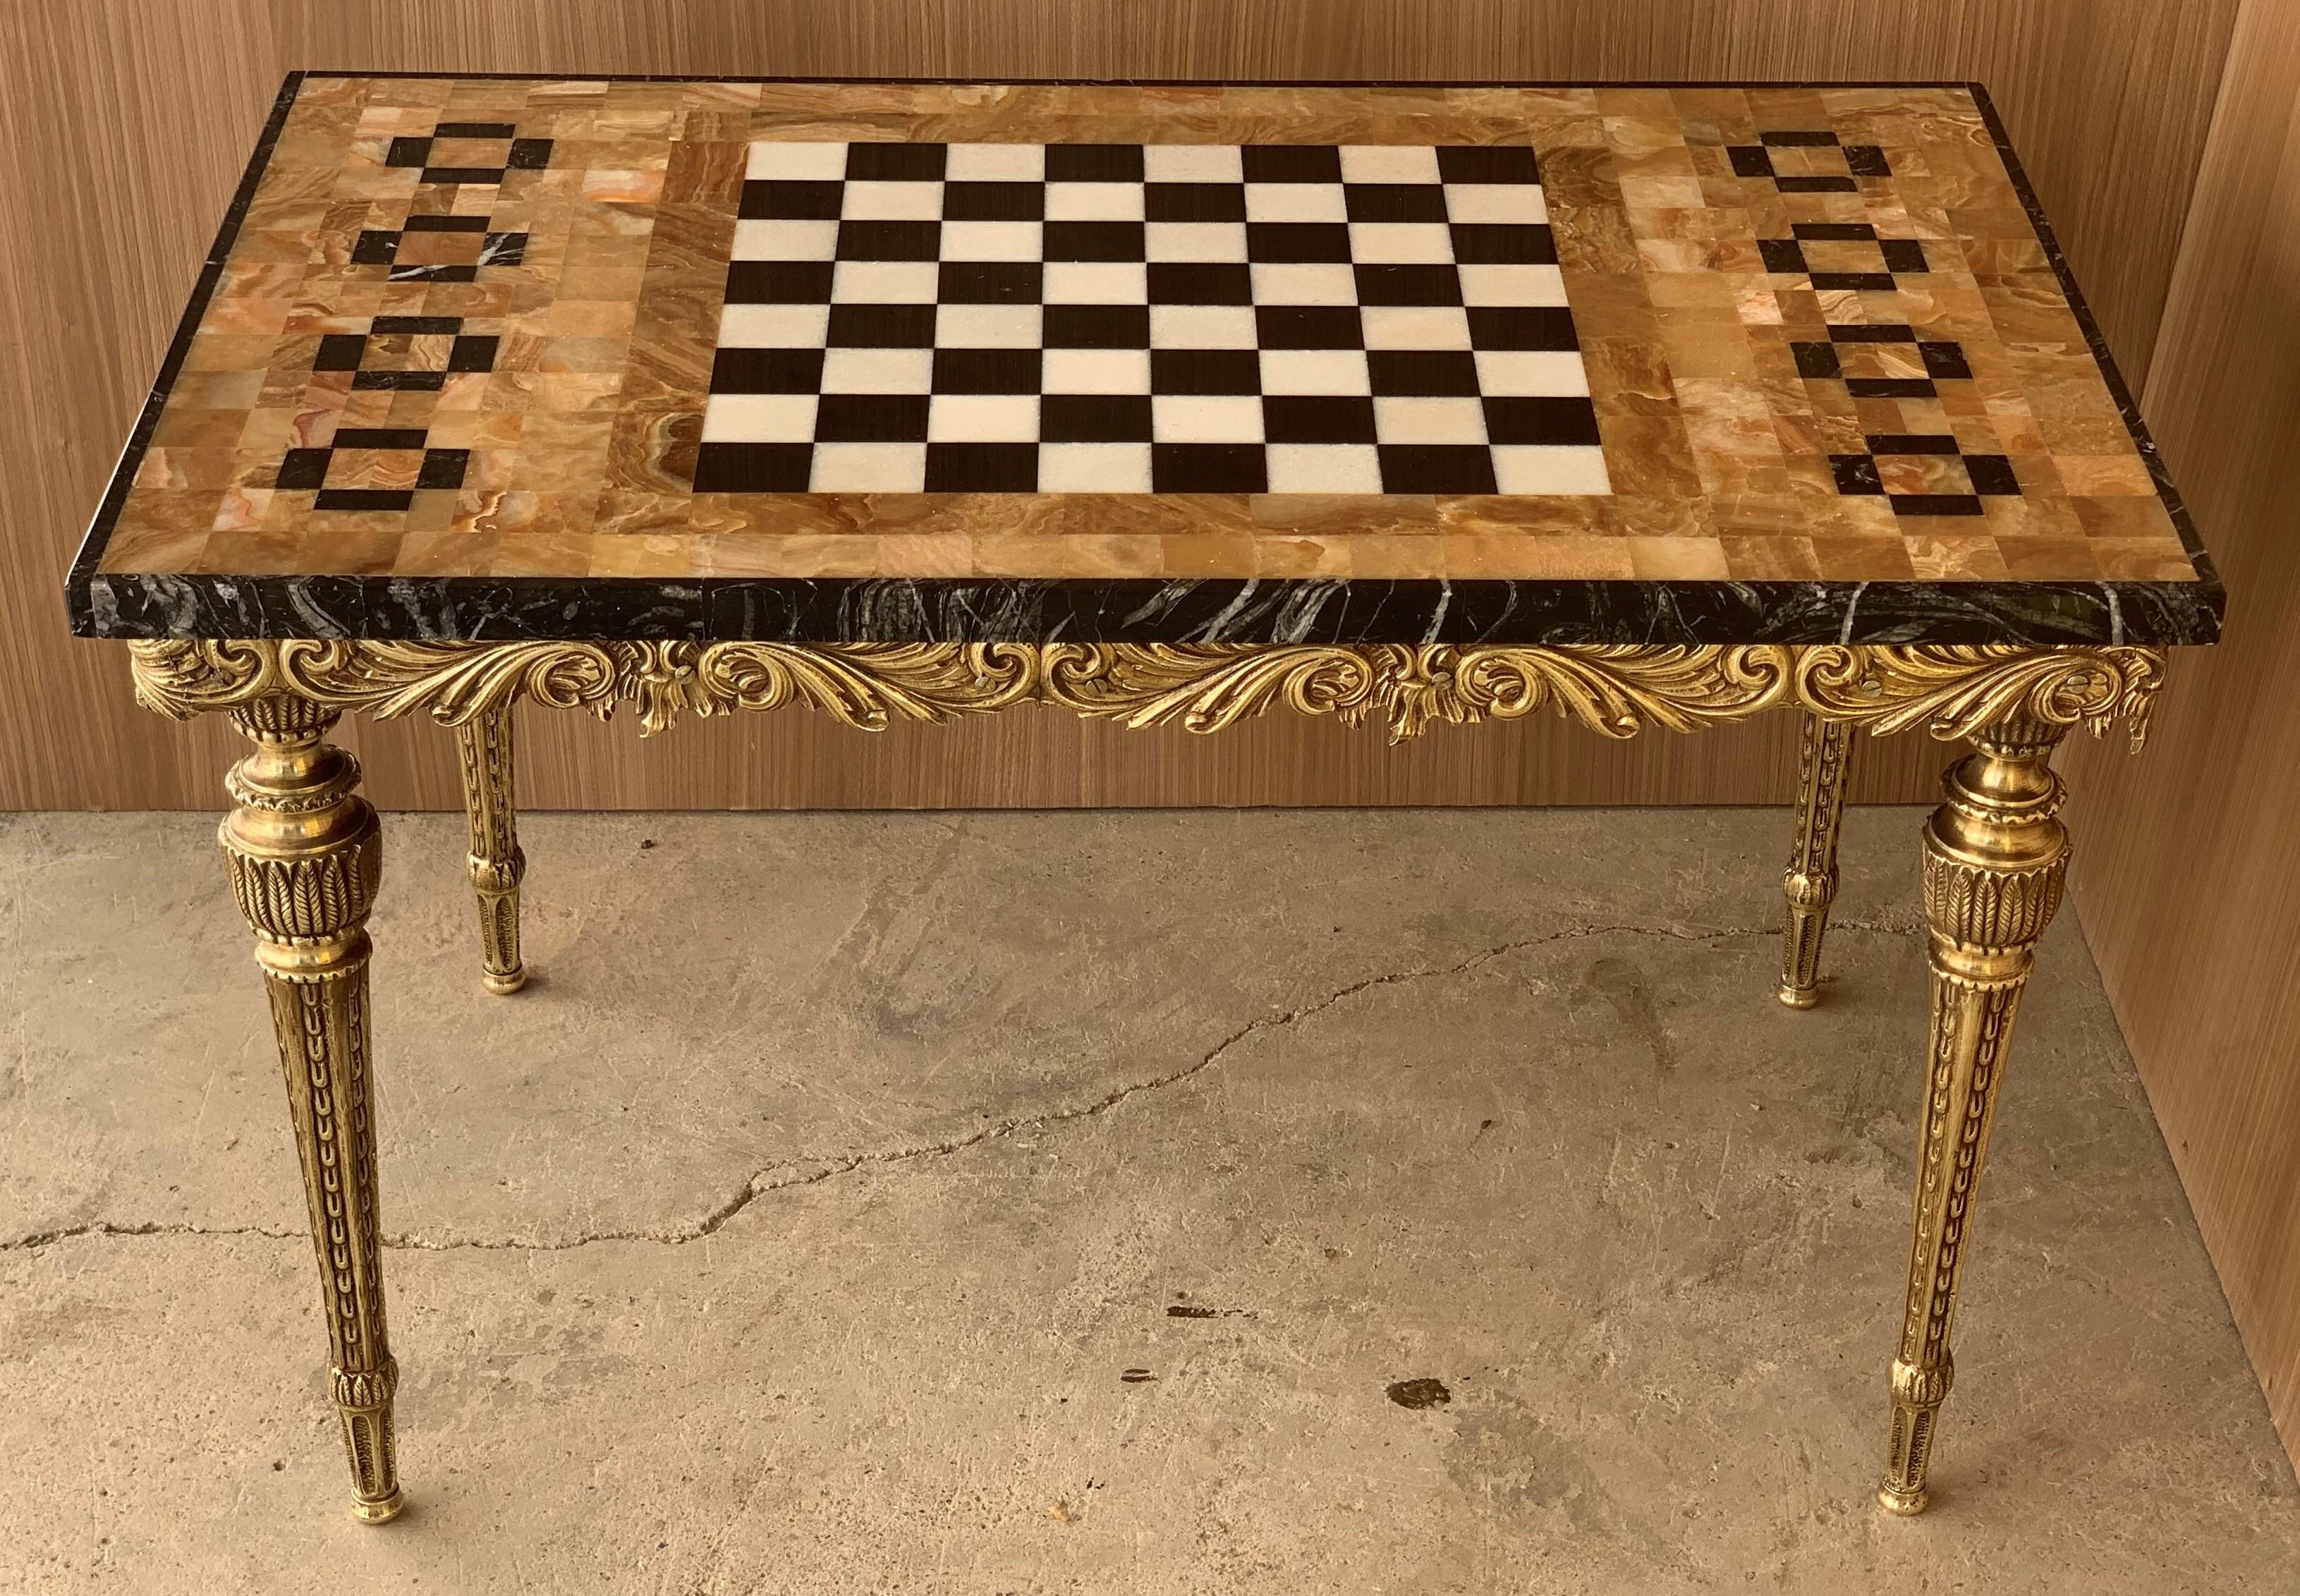 Baroque 20th Century Ormulu Mounted Bronze Game of Chess with Marble and Onix Top Table